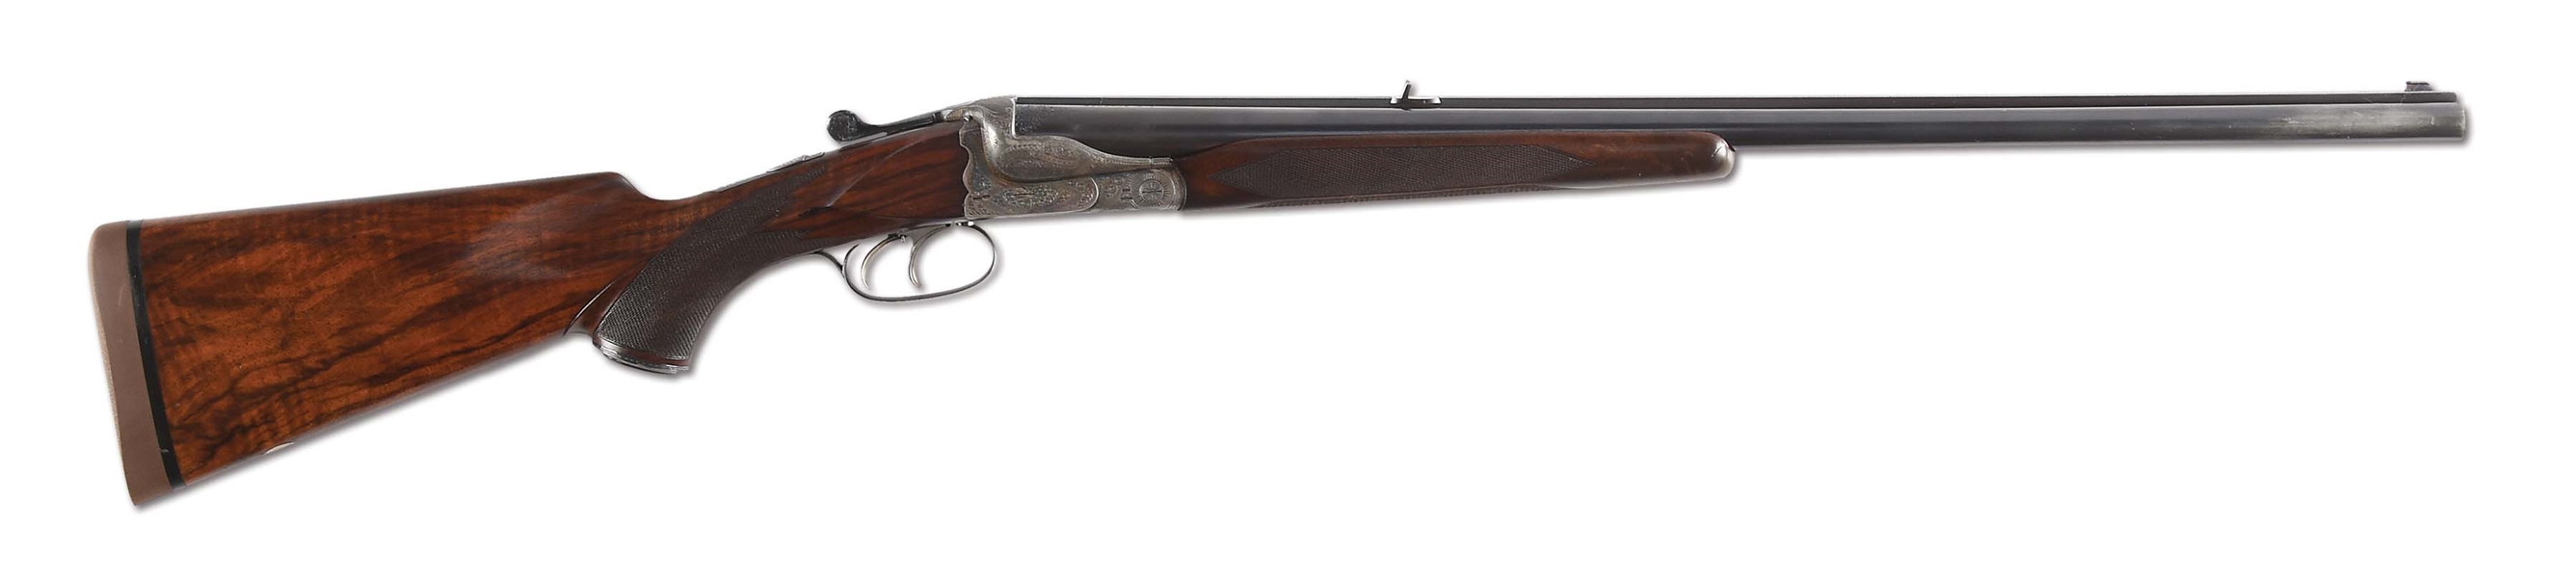 (C) SCARCE GEBRUDER MERKEL CLAMSHELL BOXLOCK ACTION EJECTOR DOUBLE RIFLE IN 500/465 NITRO EXPRESS.